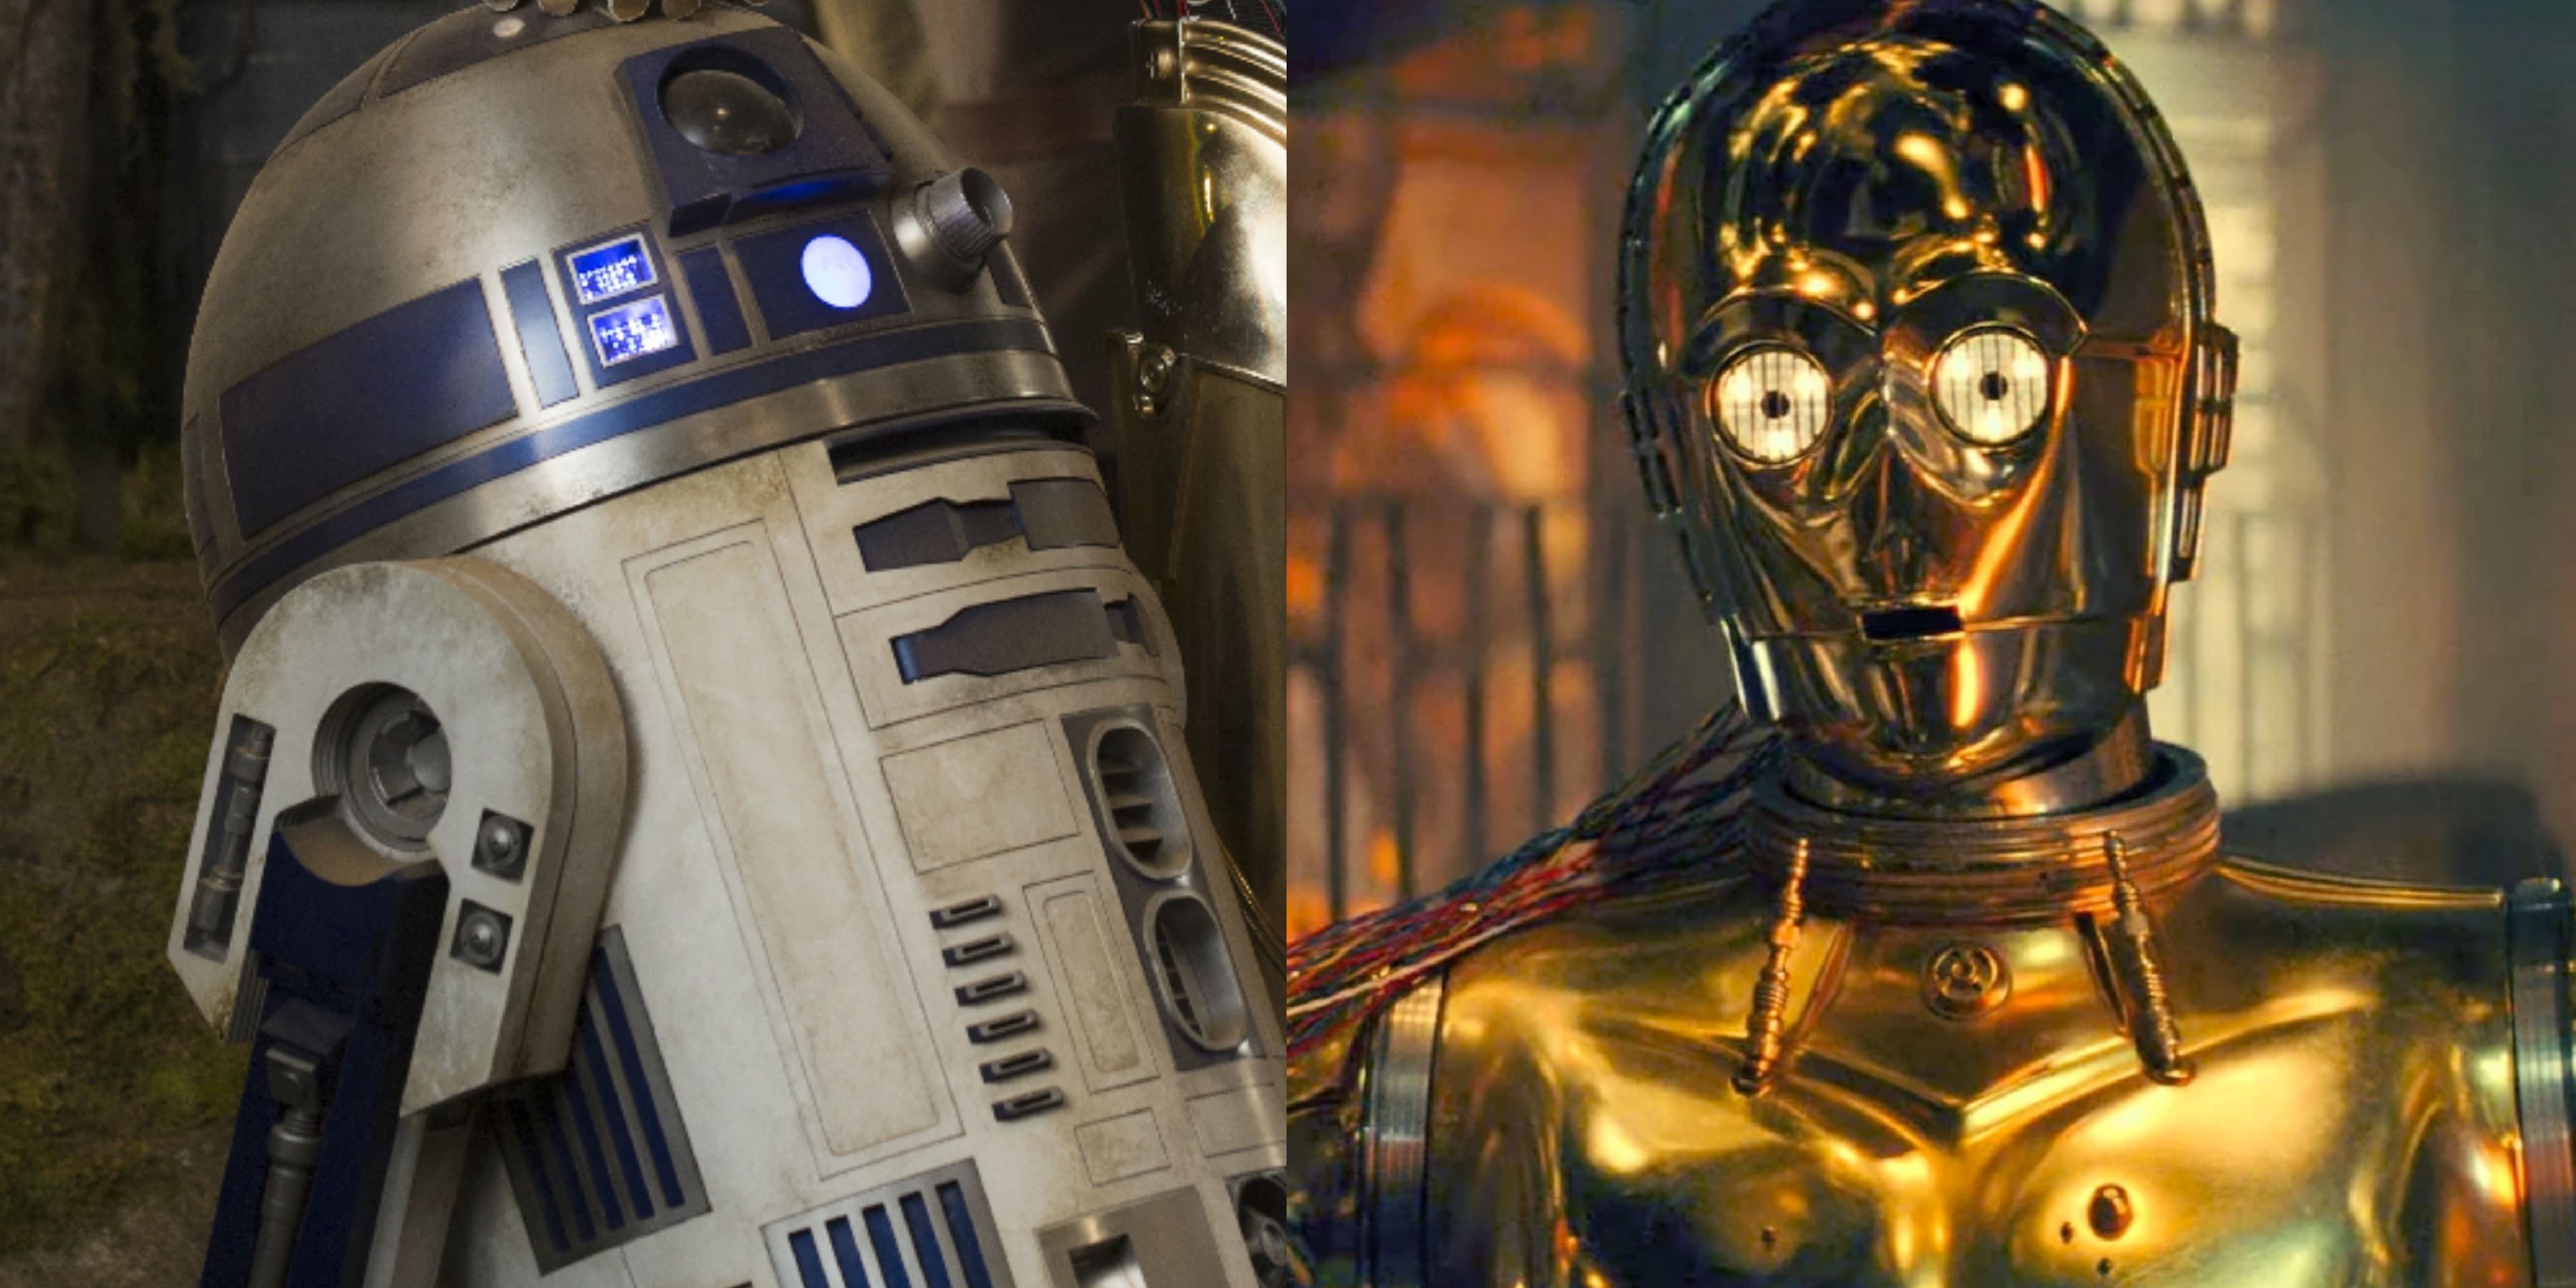 grieta África multa R2-D2 Narrating Star Wars Theory - Is R2-D2 Telling the Story to C-3PO in  the End of Rise of Skywalker?